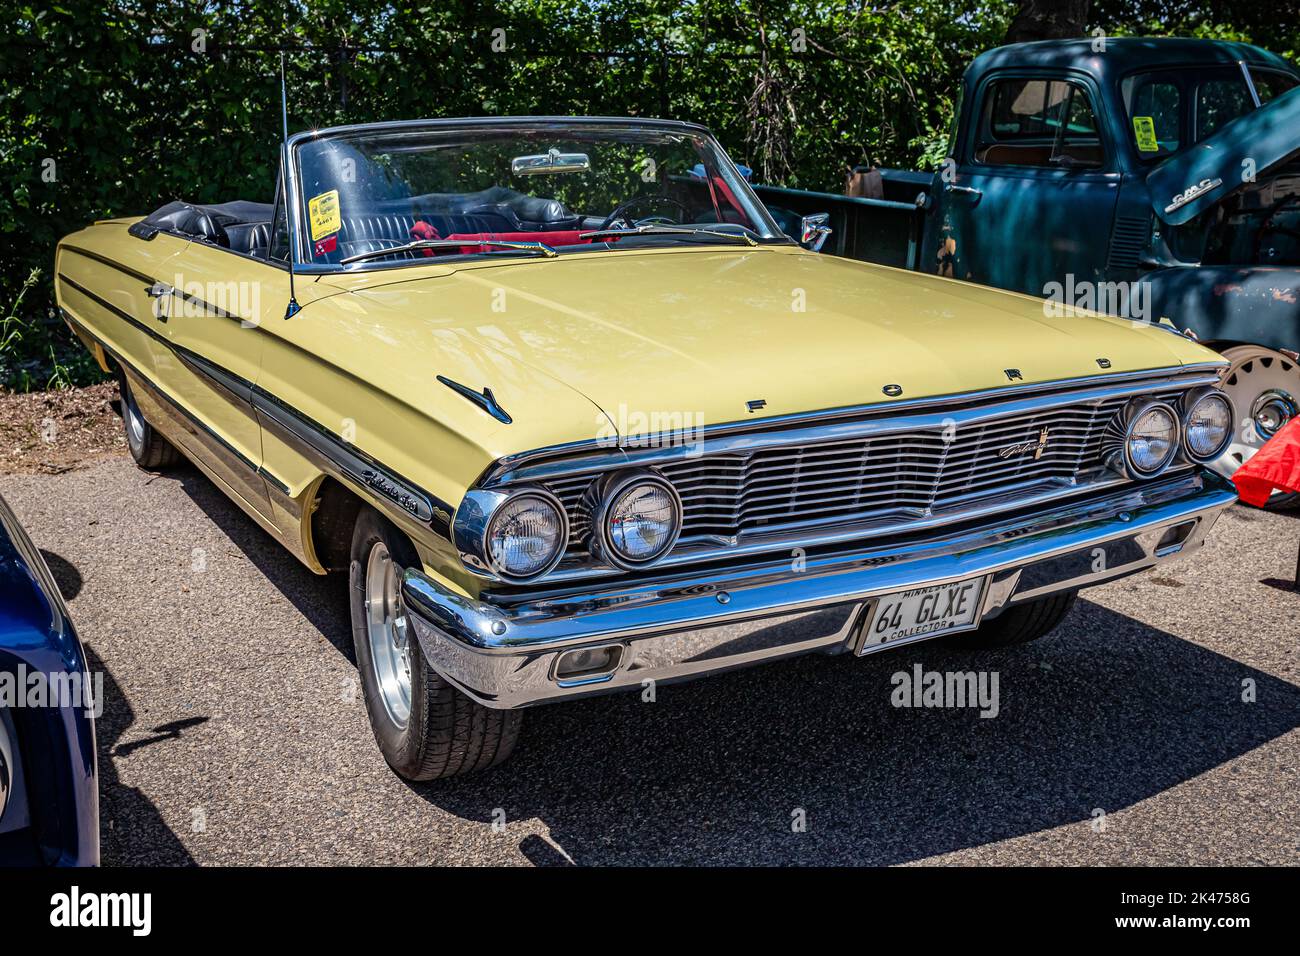 Falcon Heights, MN - June 18, 2022: High perspective front corner view of a 1964 Ford Galaxie 500 Convertible at a local car show. Stock Photo